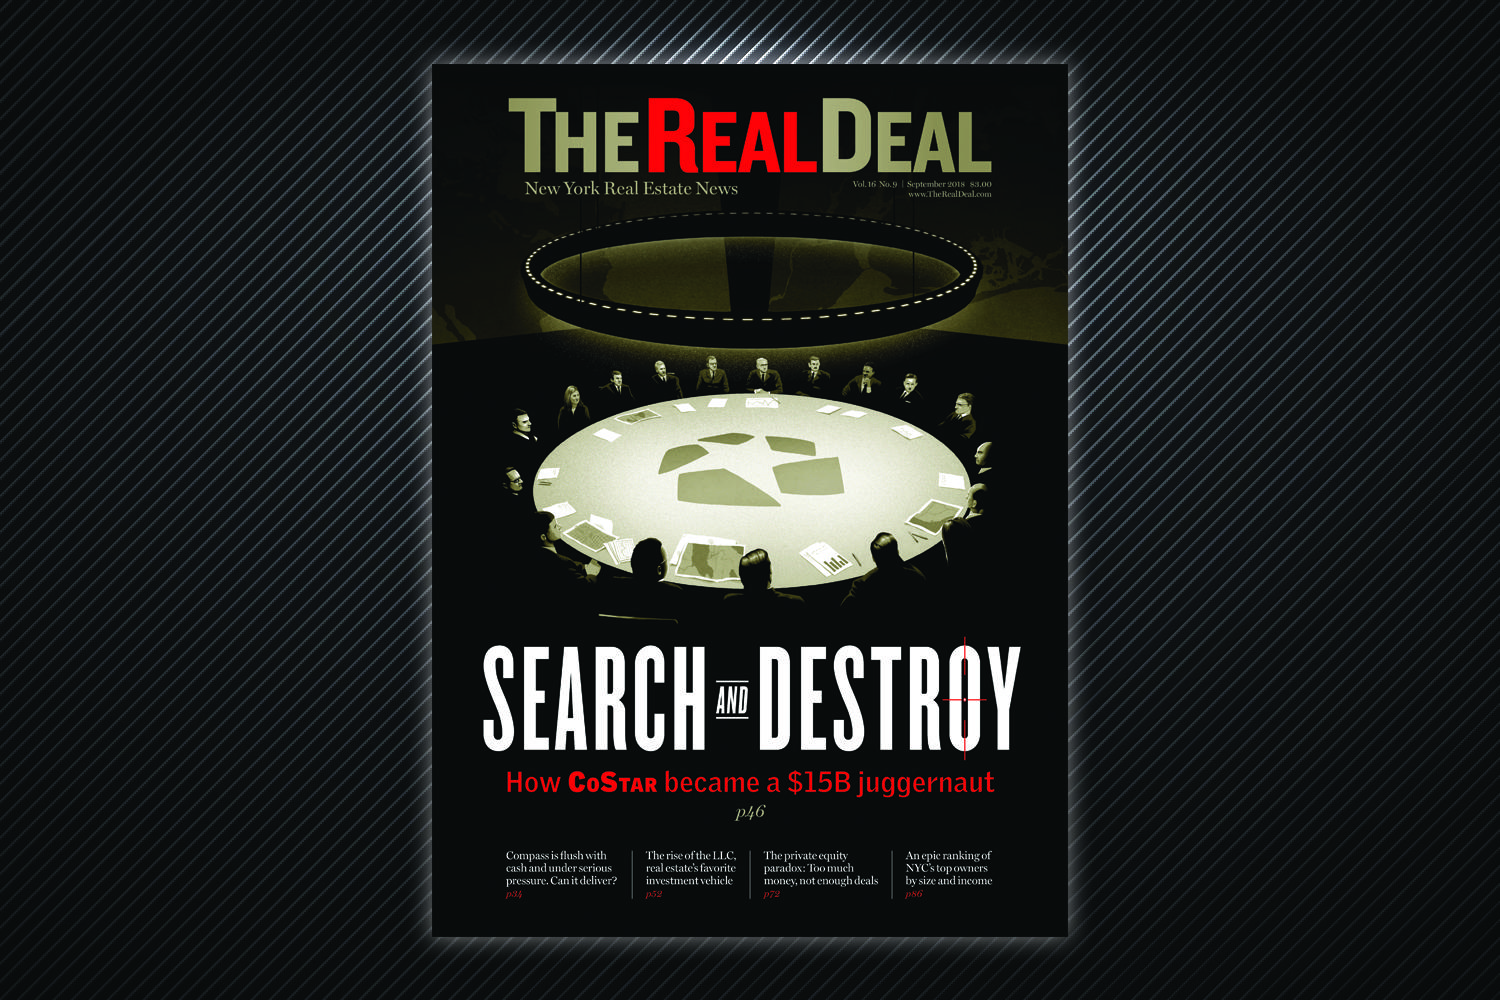 The Real Deal's September issue